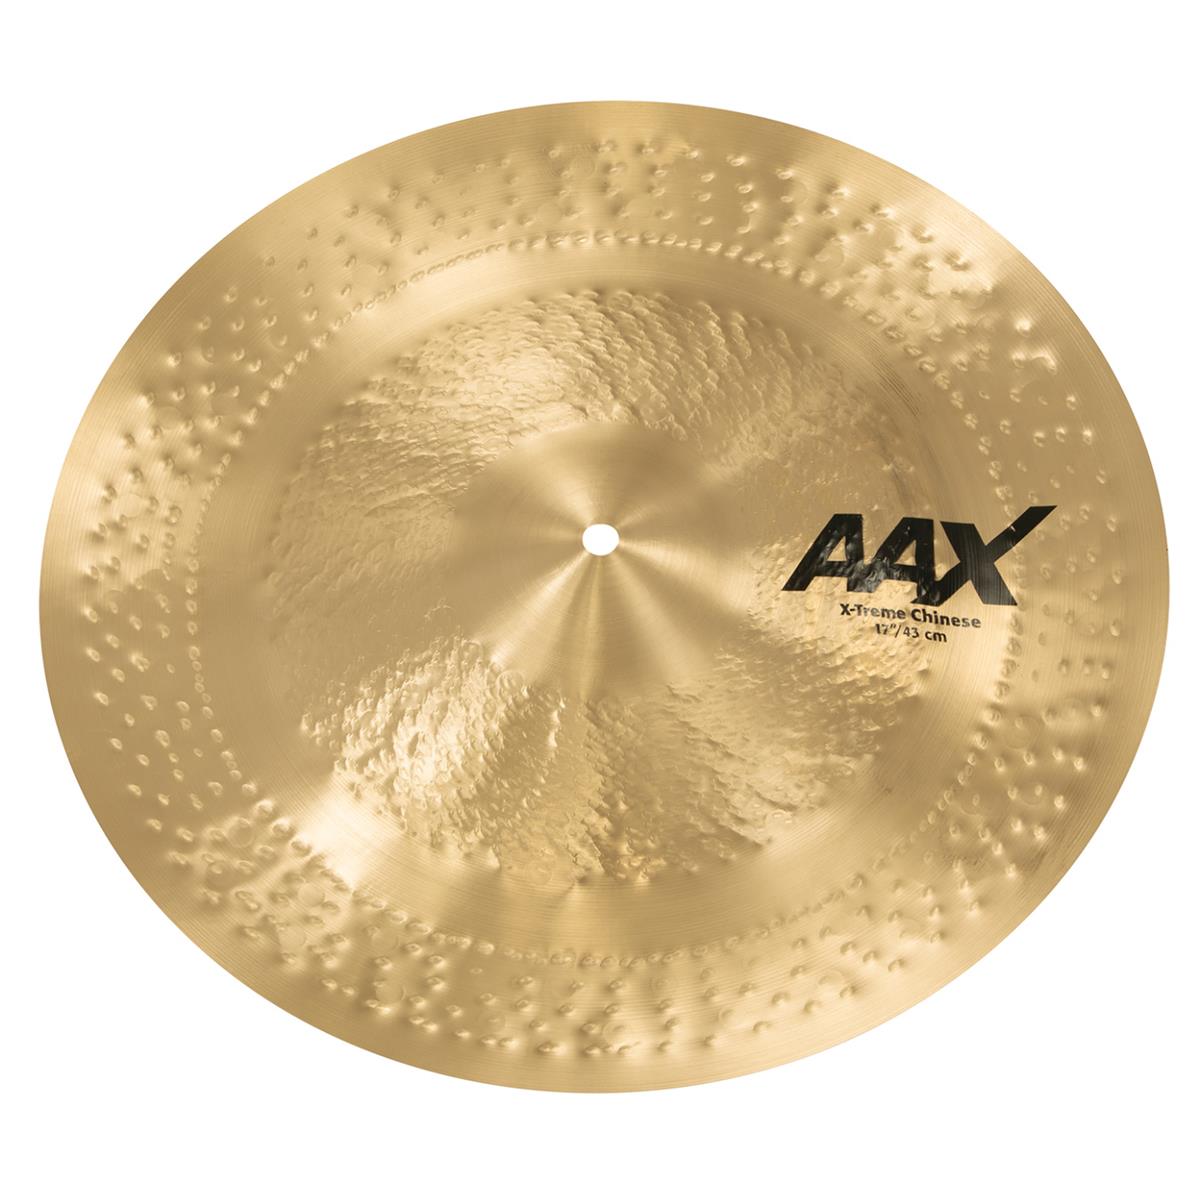 Sabian 17" AAX X-Treme Chinese Cymbal, Thin, Natural Finish An extremely fast and open attack, raw and ripping sound, and punch power with rapid decay make the SABIAN 17" AAX X-Treme Chinese the ideal choice to cut through any band at any volume. Sure, the band may hate you, but you know a good Tg when you hear it! The SABIAN AAX series delivers consistently bright, crisp, clear and cutting responses - AAX is the ultimate Modern Bright sound!